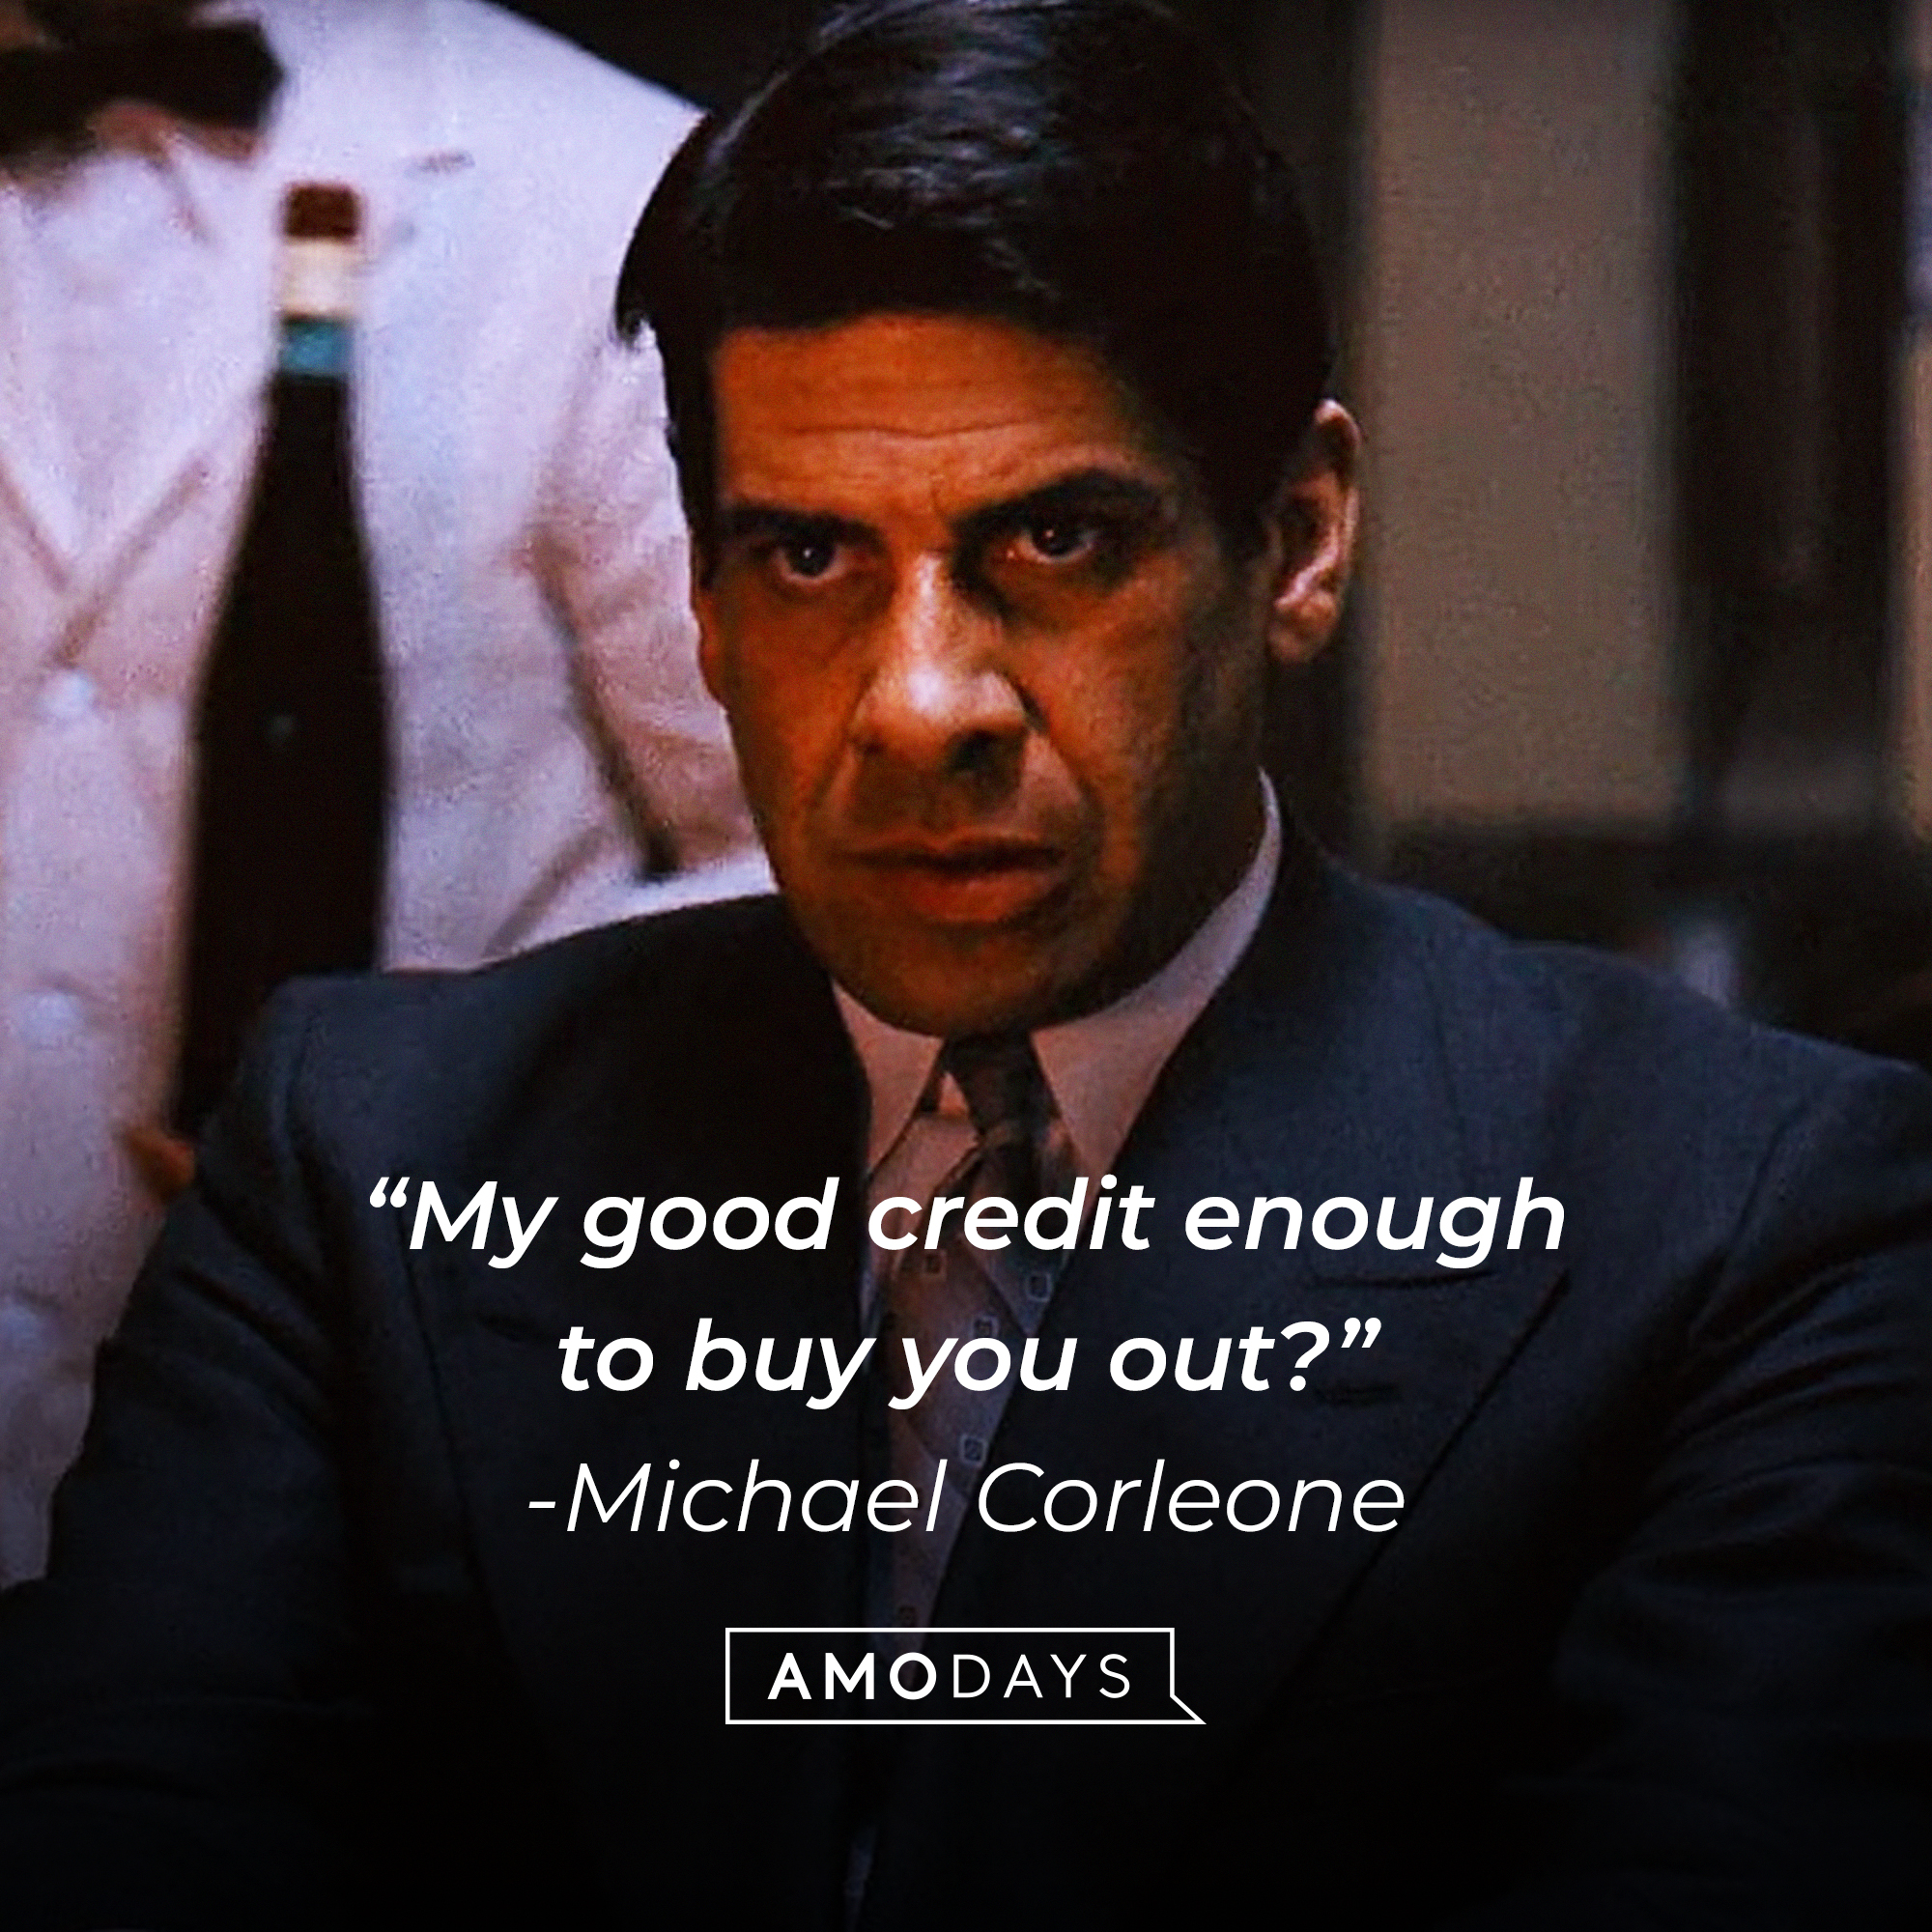 Michael Corleone's quote: "My good credit enough to buy you out?" | Source: Facebook/thegodfather